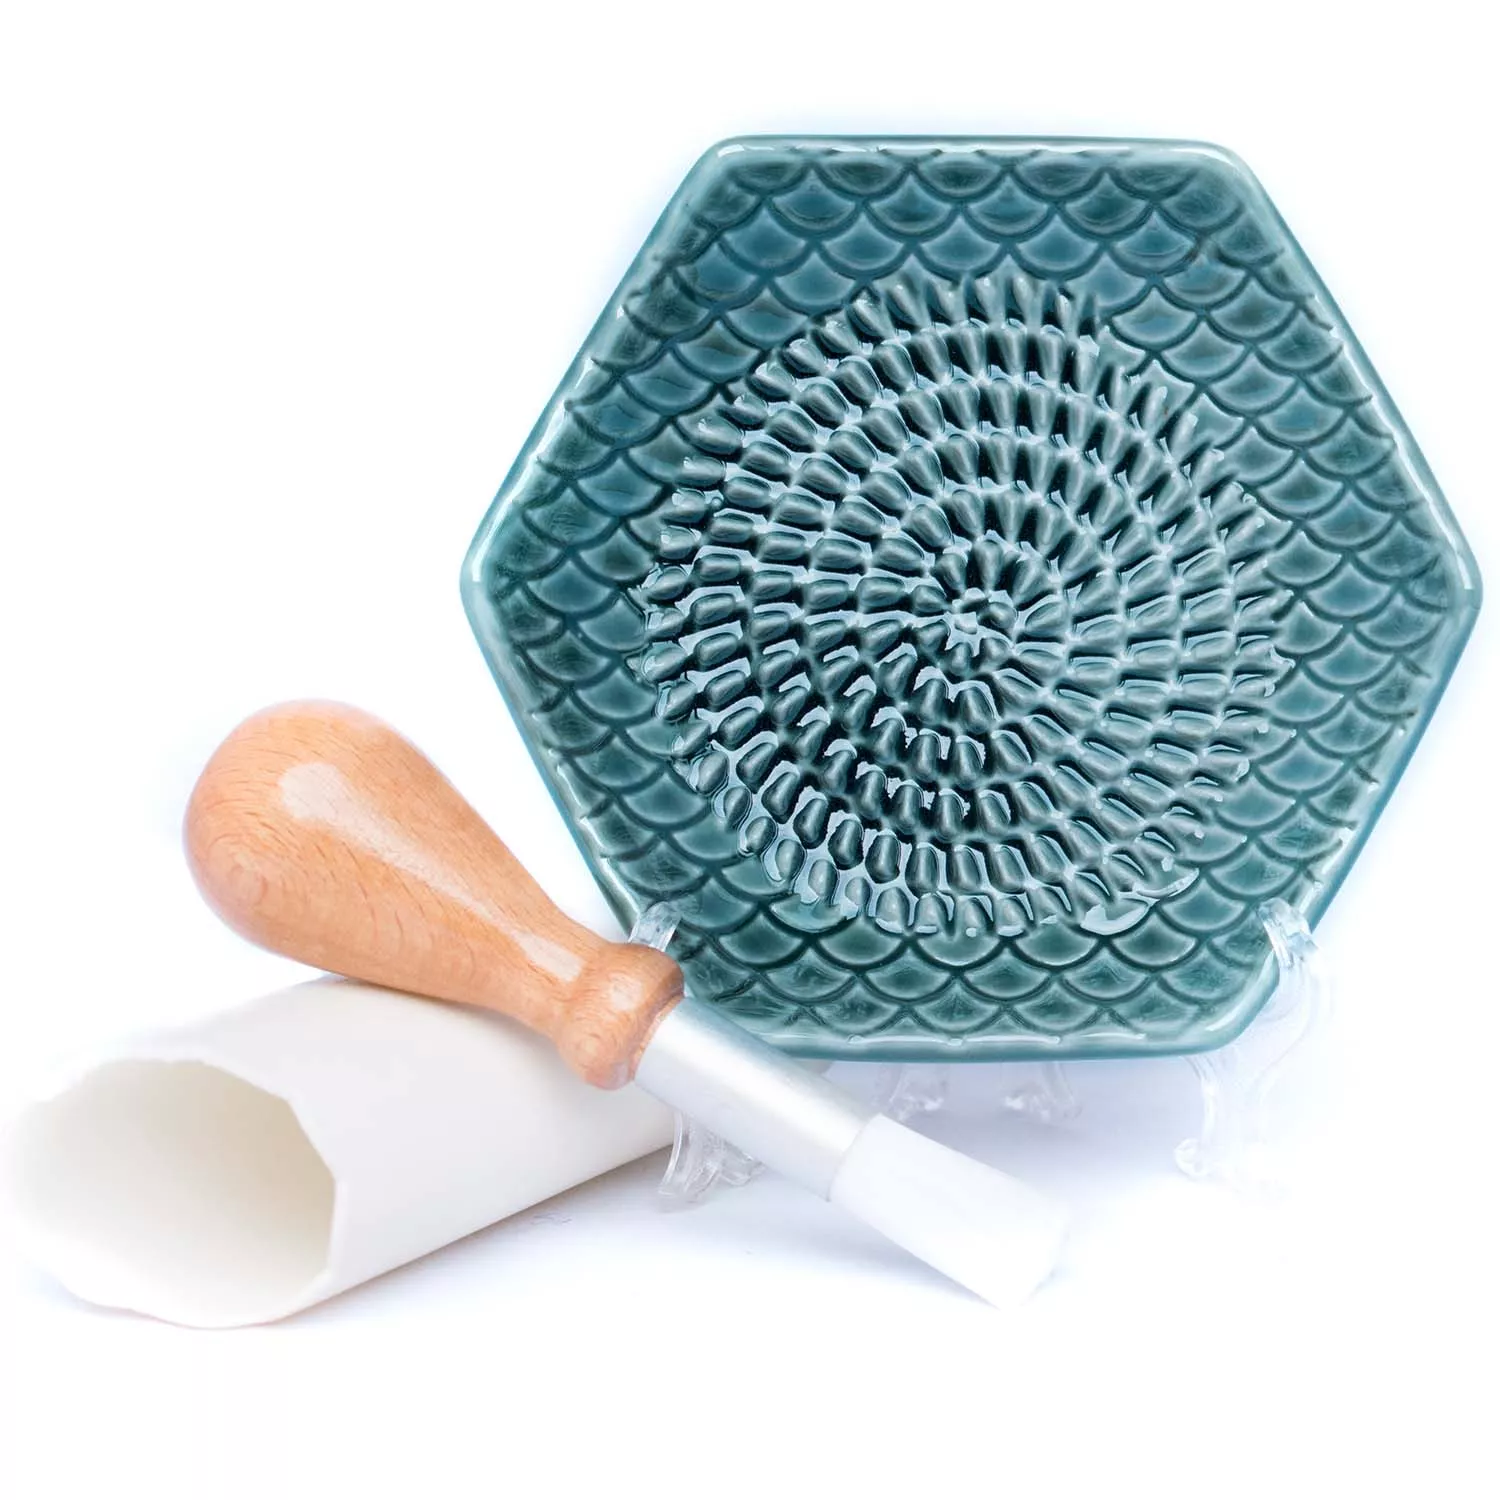 new colorful garlic grater plate